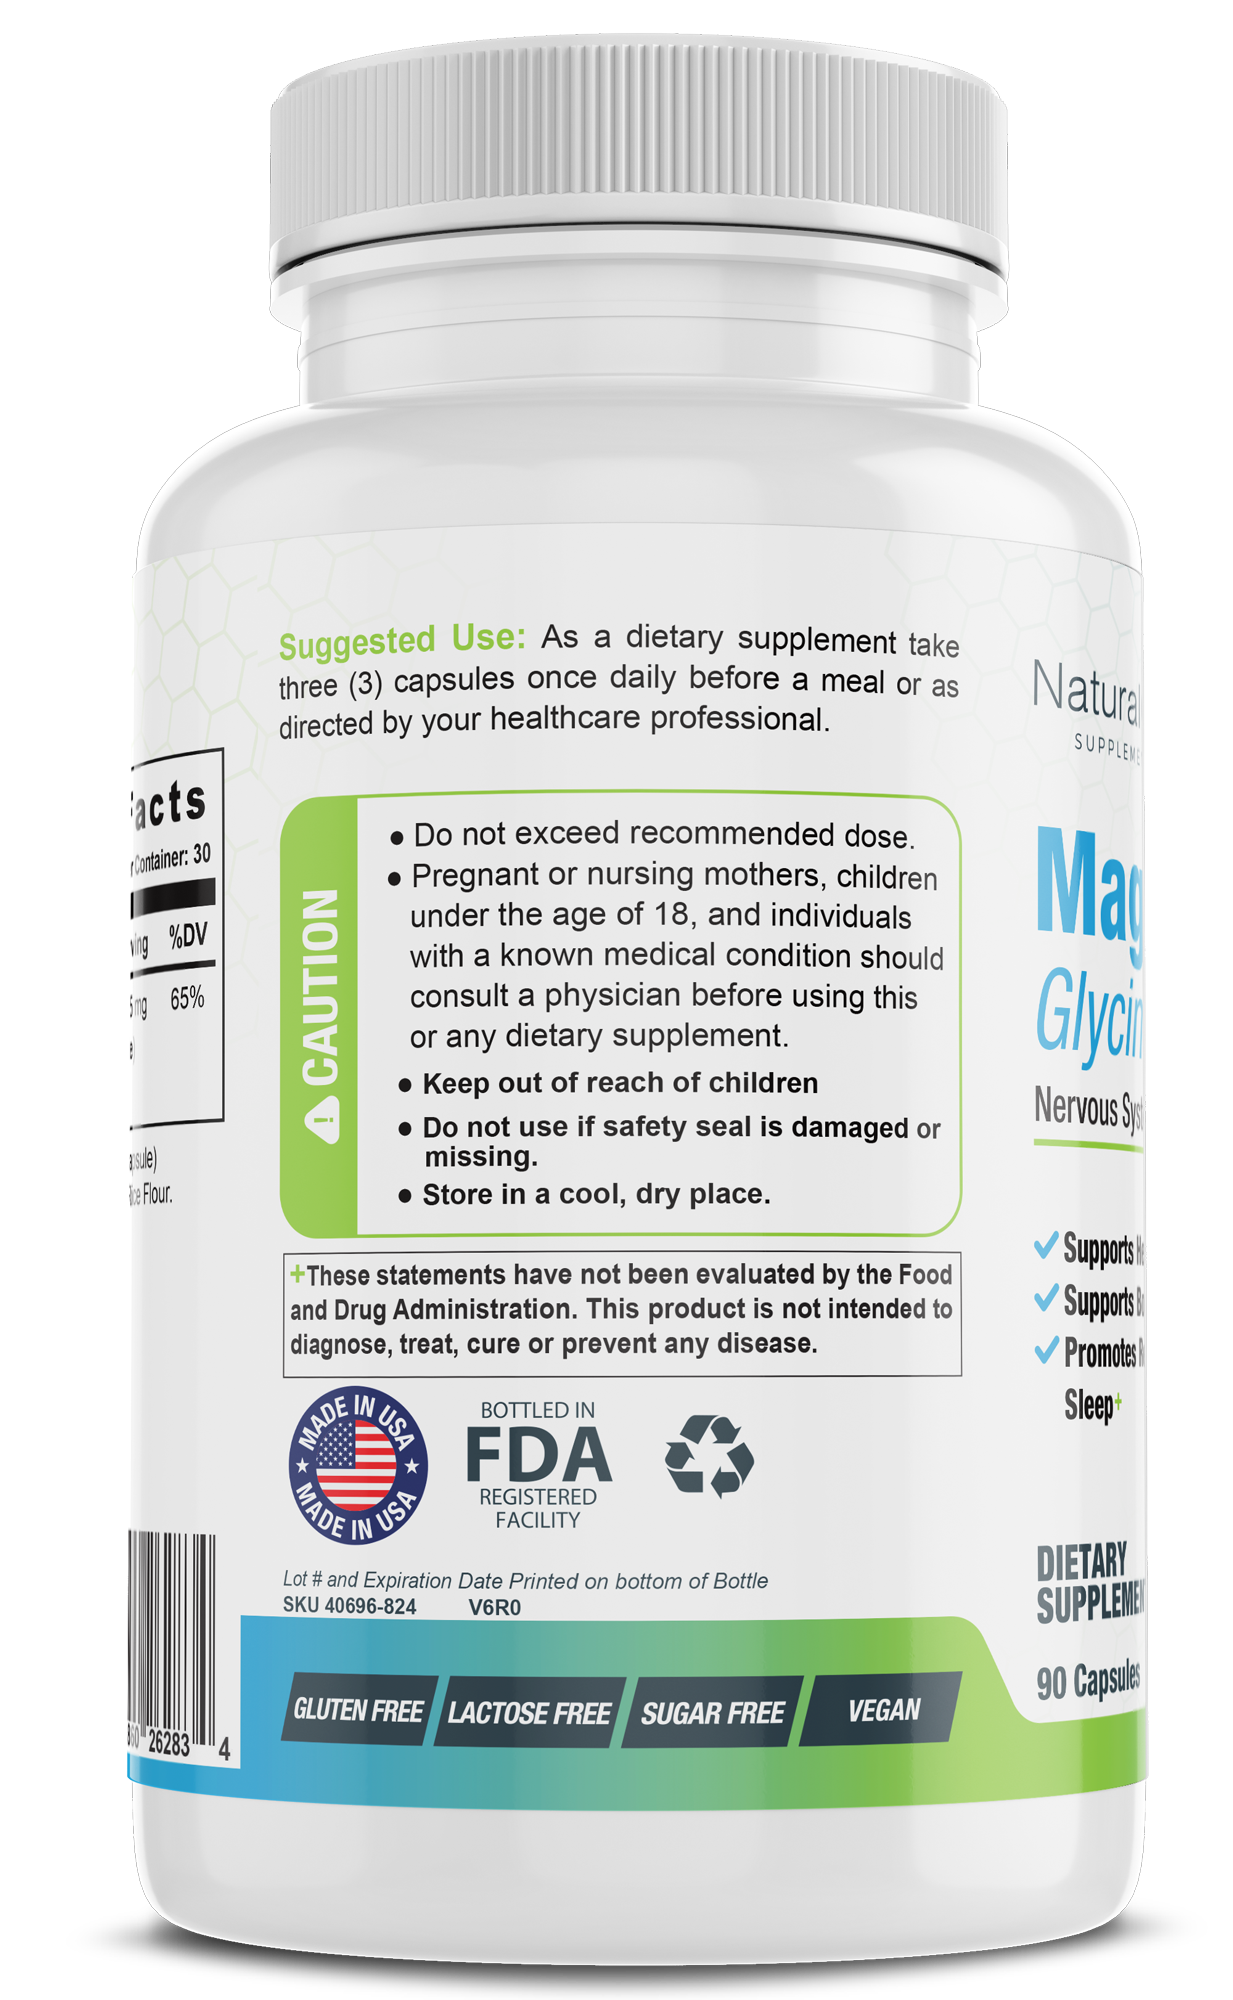 Magnesium Glycinate - Nervous System Support